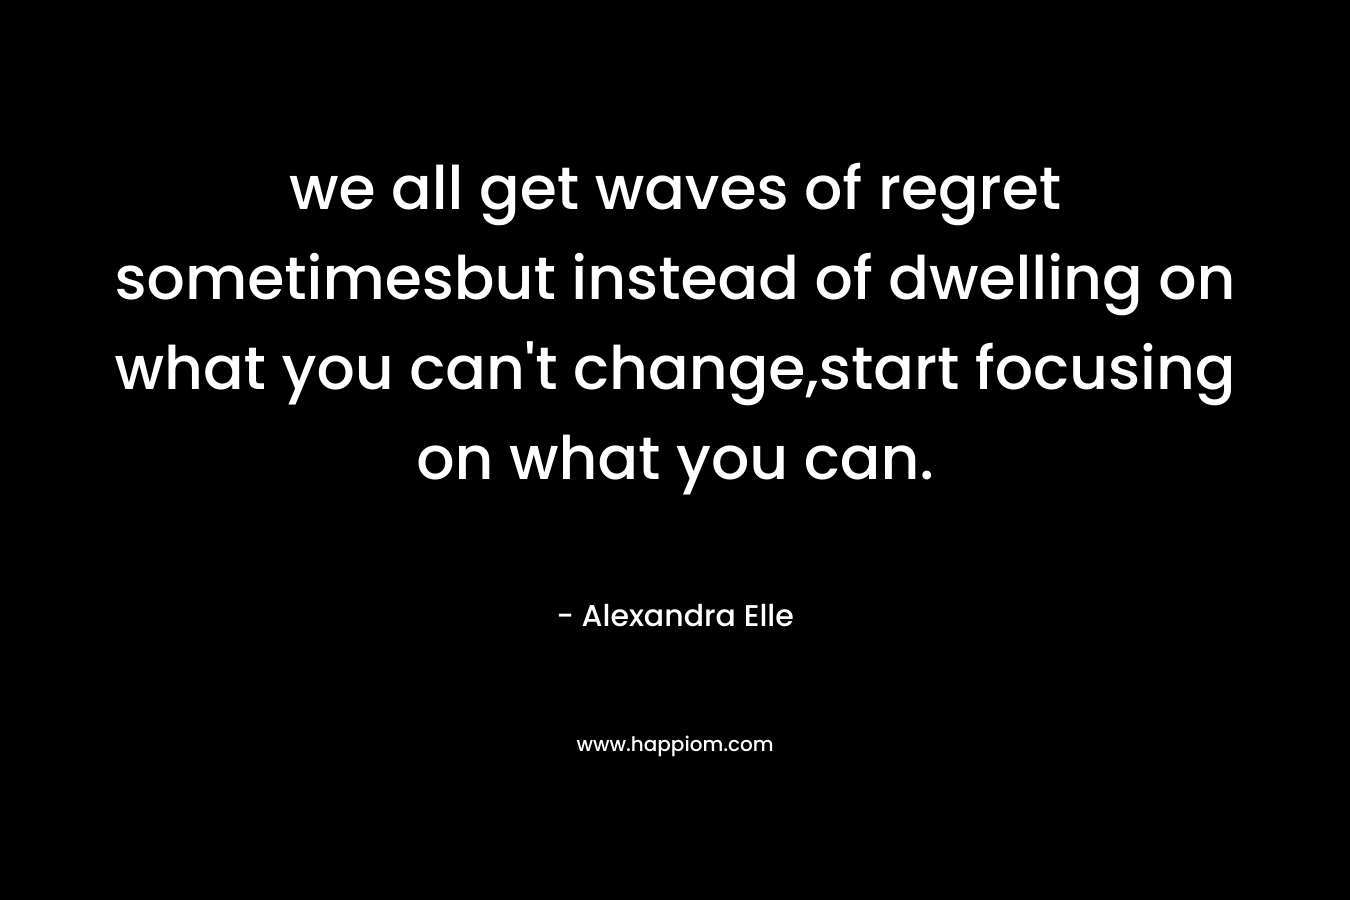 we all get waves of regret sometimesbut instead of dwelling on what you can’t change,start focusing on what you can. – Alexandra Elle